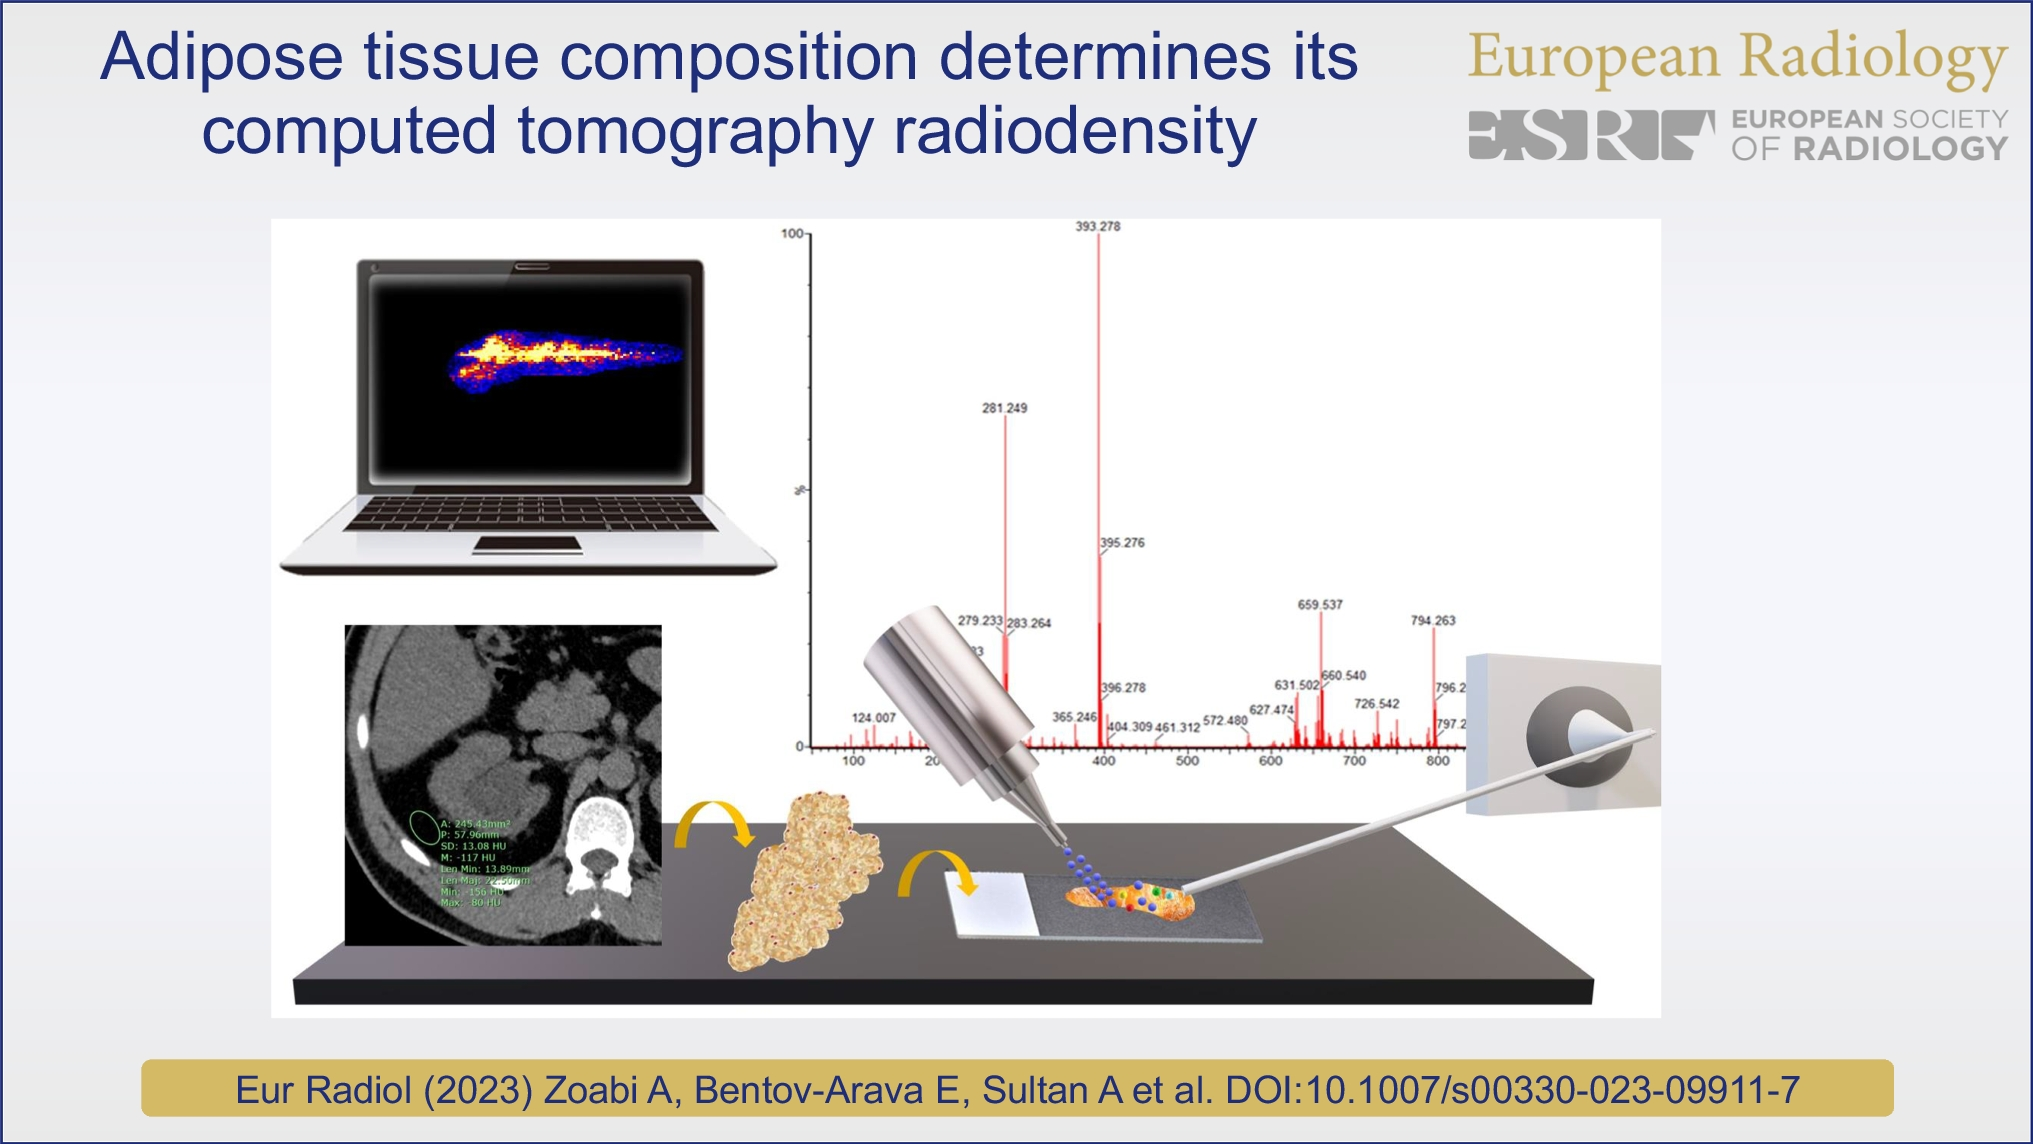 Adipose tissue composition determines its computed tomography radiodensity